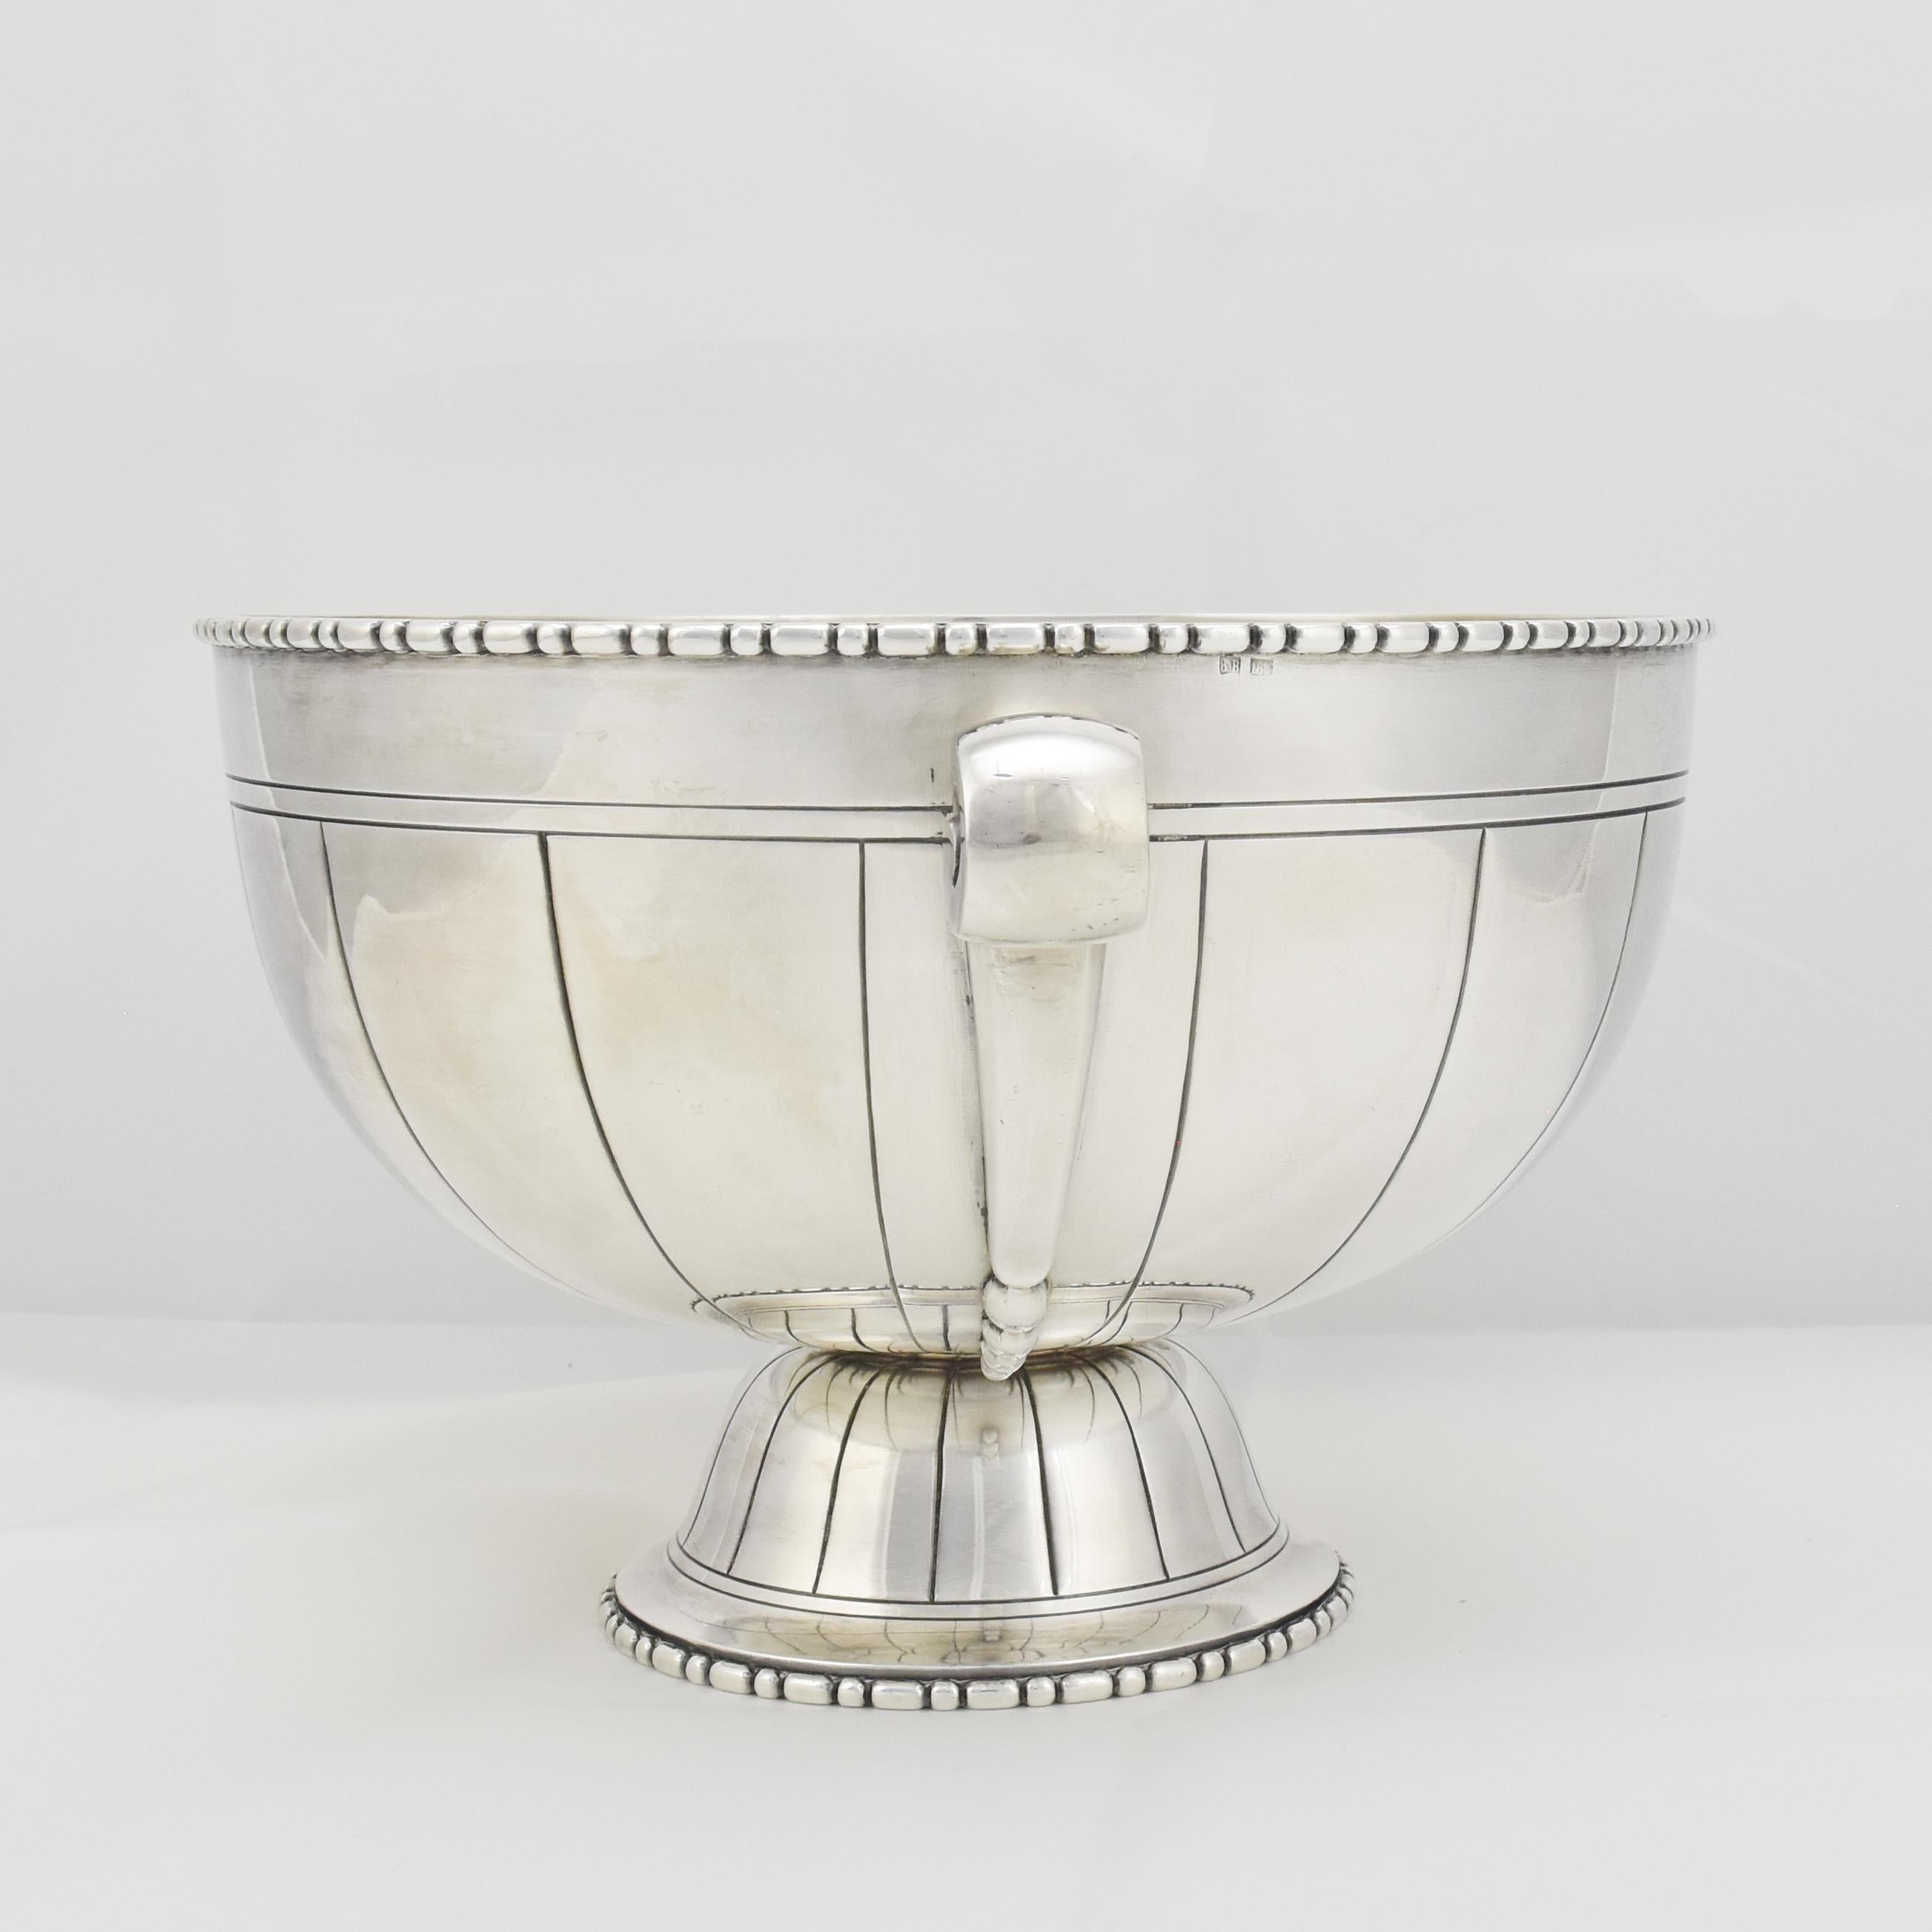 Silver Plate French Art Deco Centerpiece Silverplate Bowl by Bouillet & Bourdelle 1920s For Sale